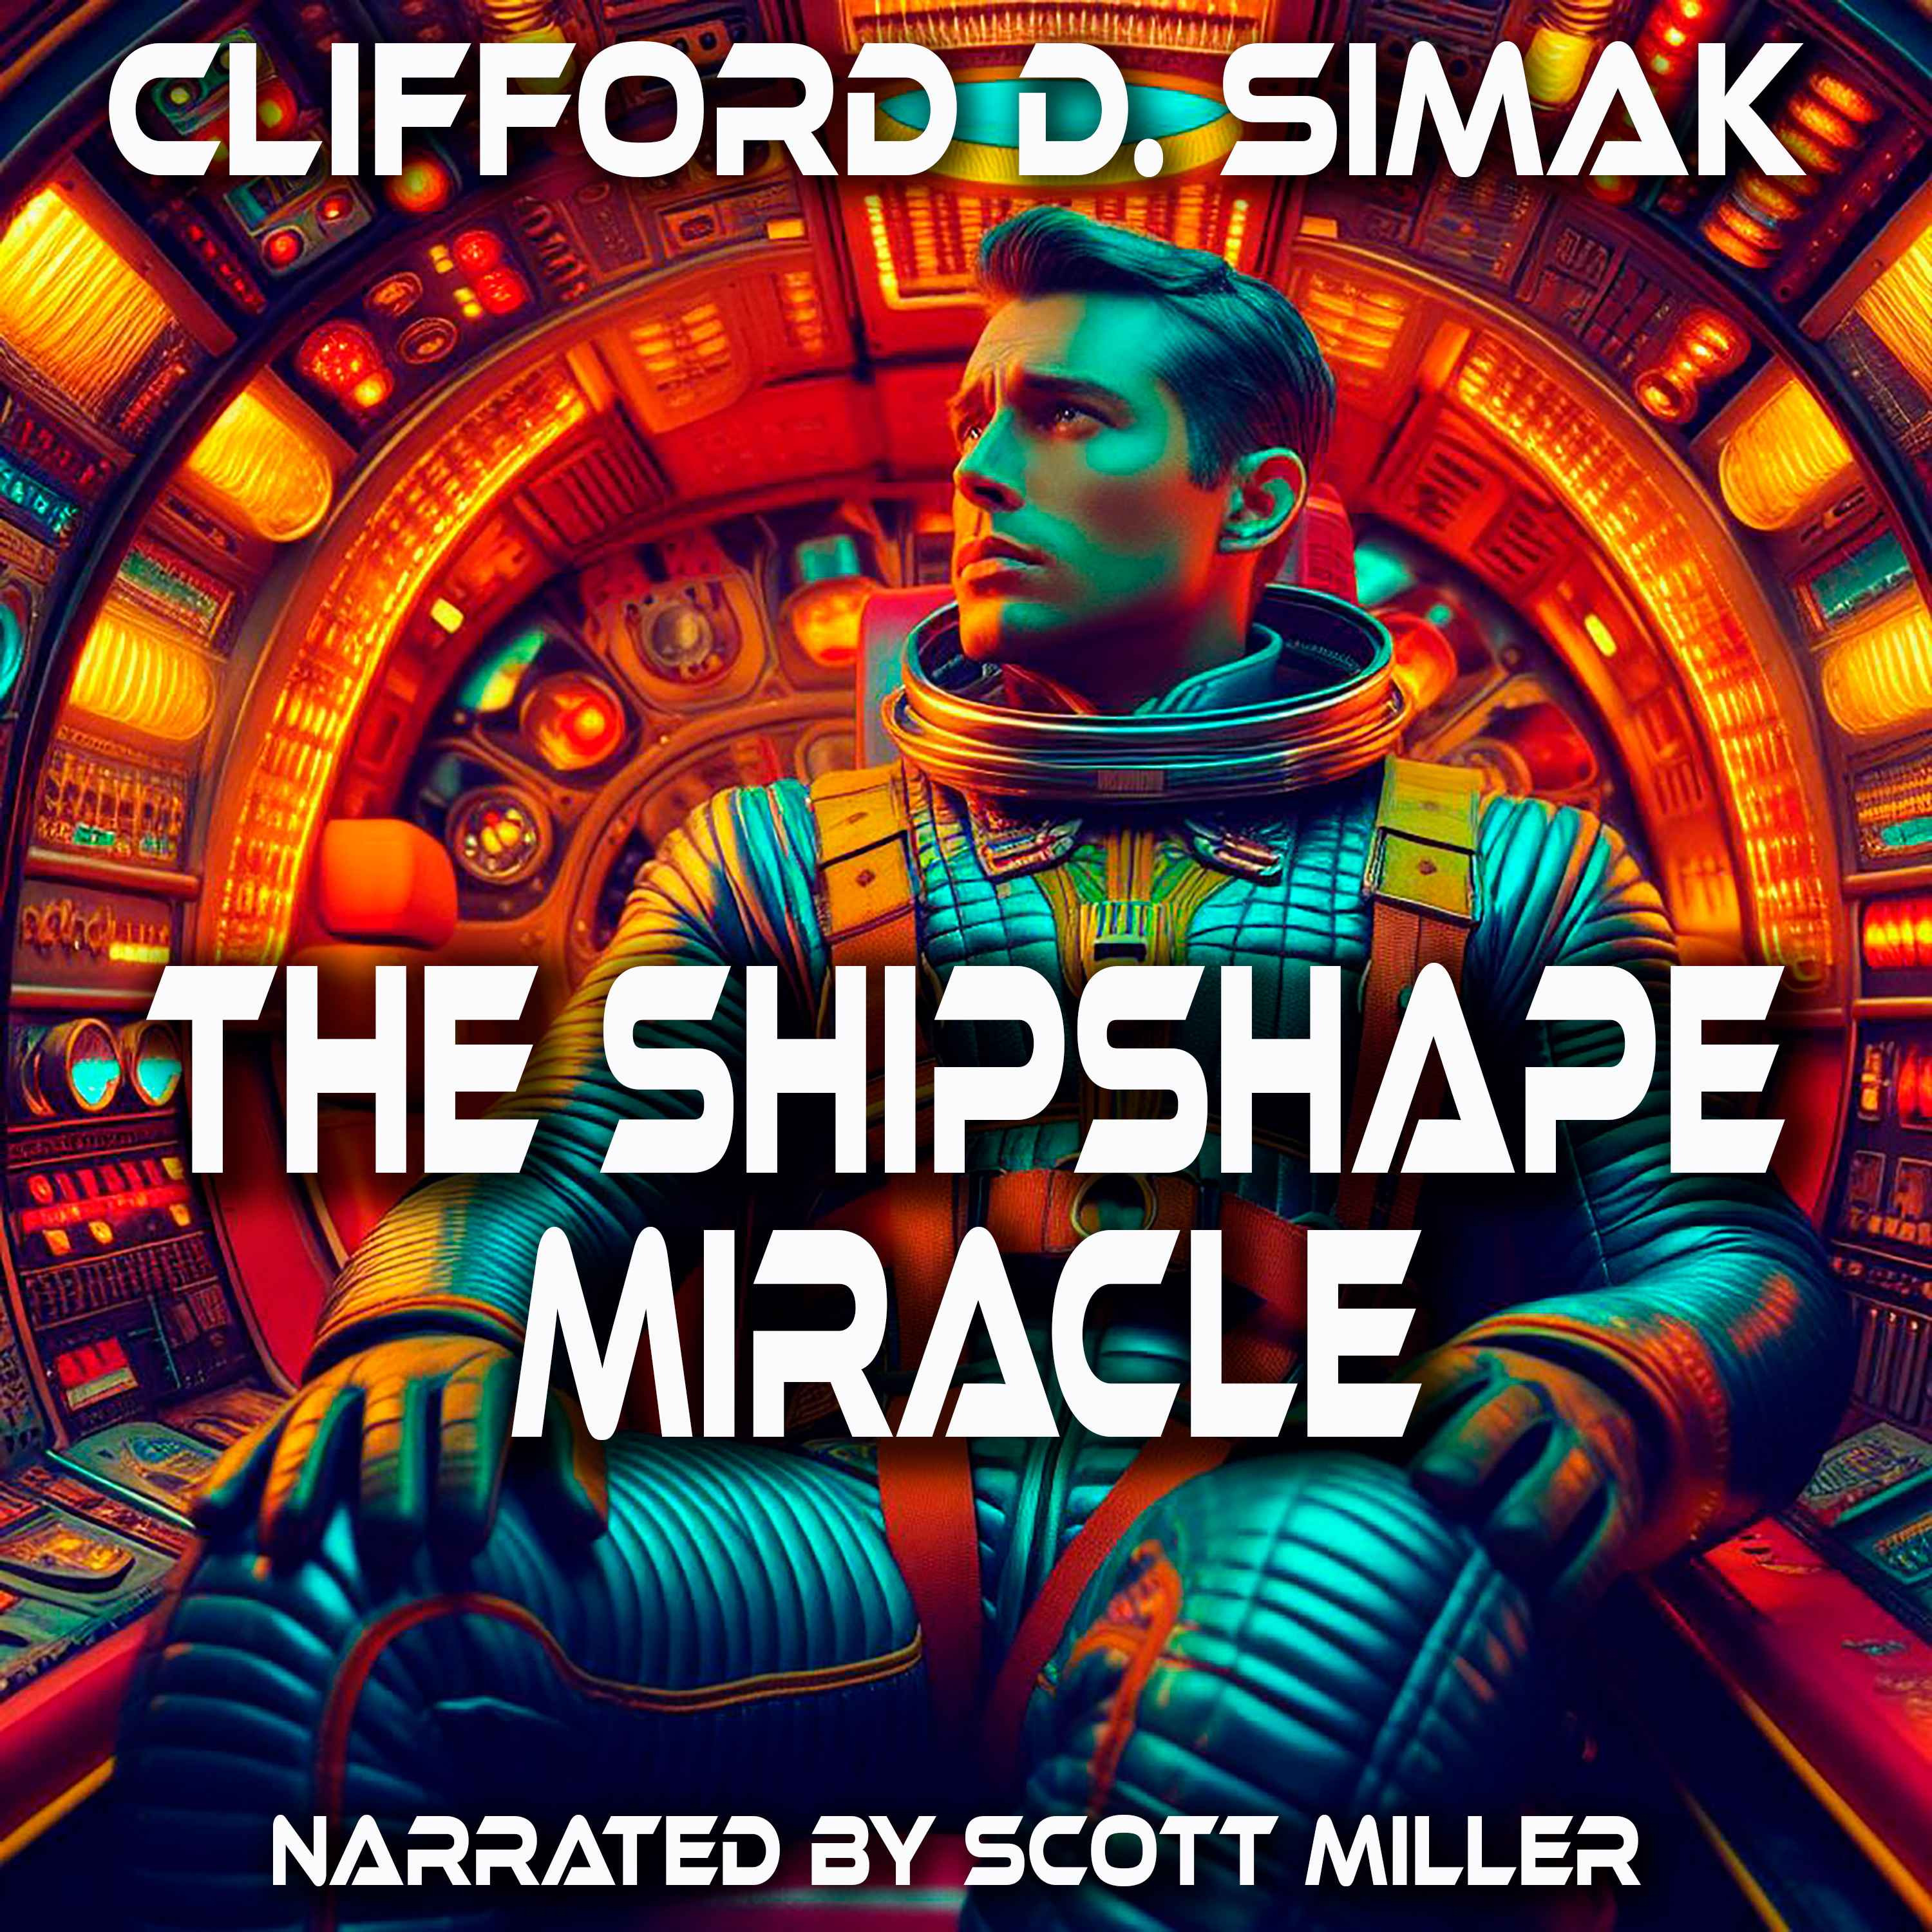 The Shipshape Miracle by Clifford D. Simak - Clifford D. Simak Short Stories